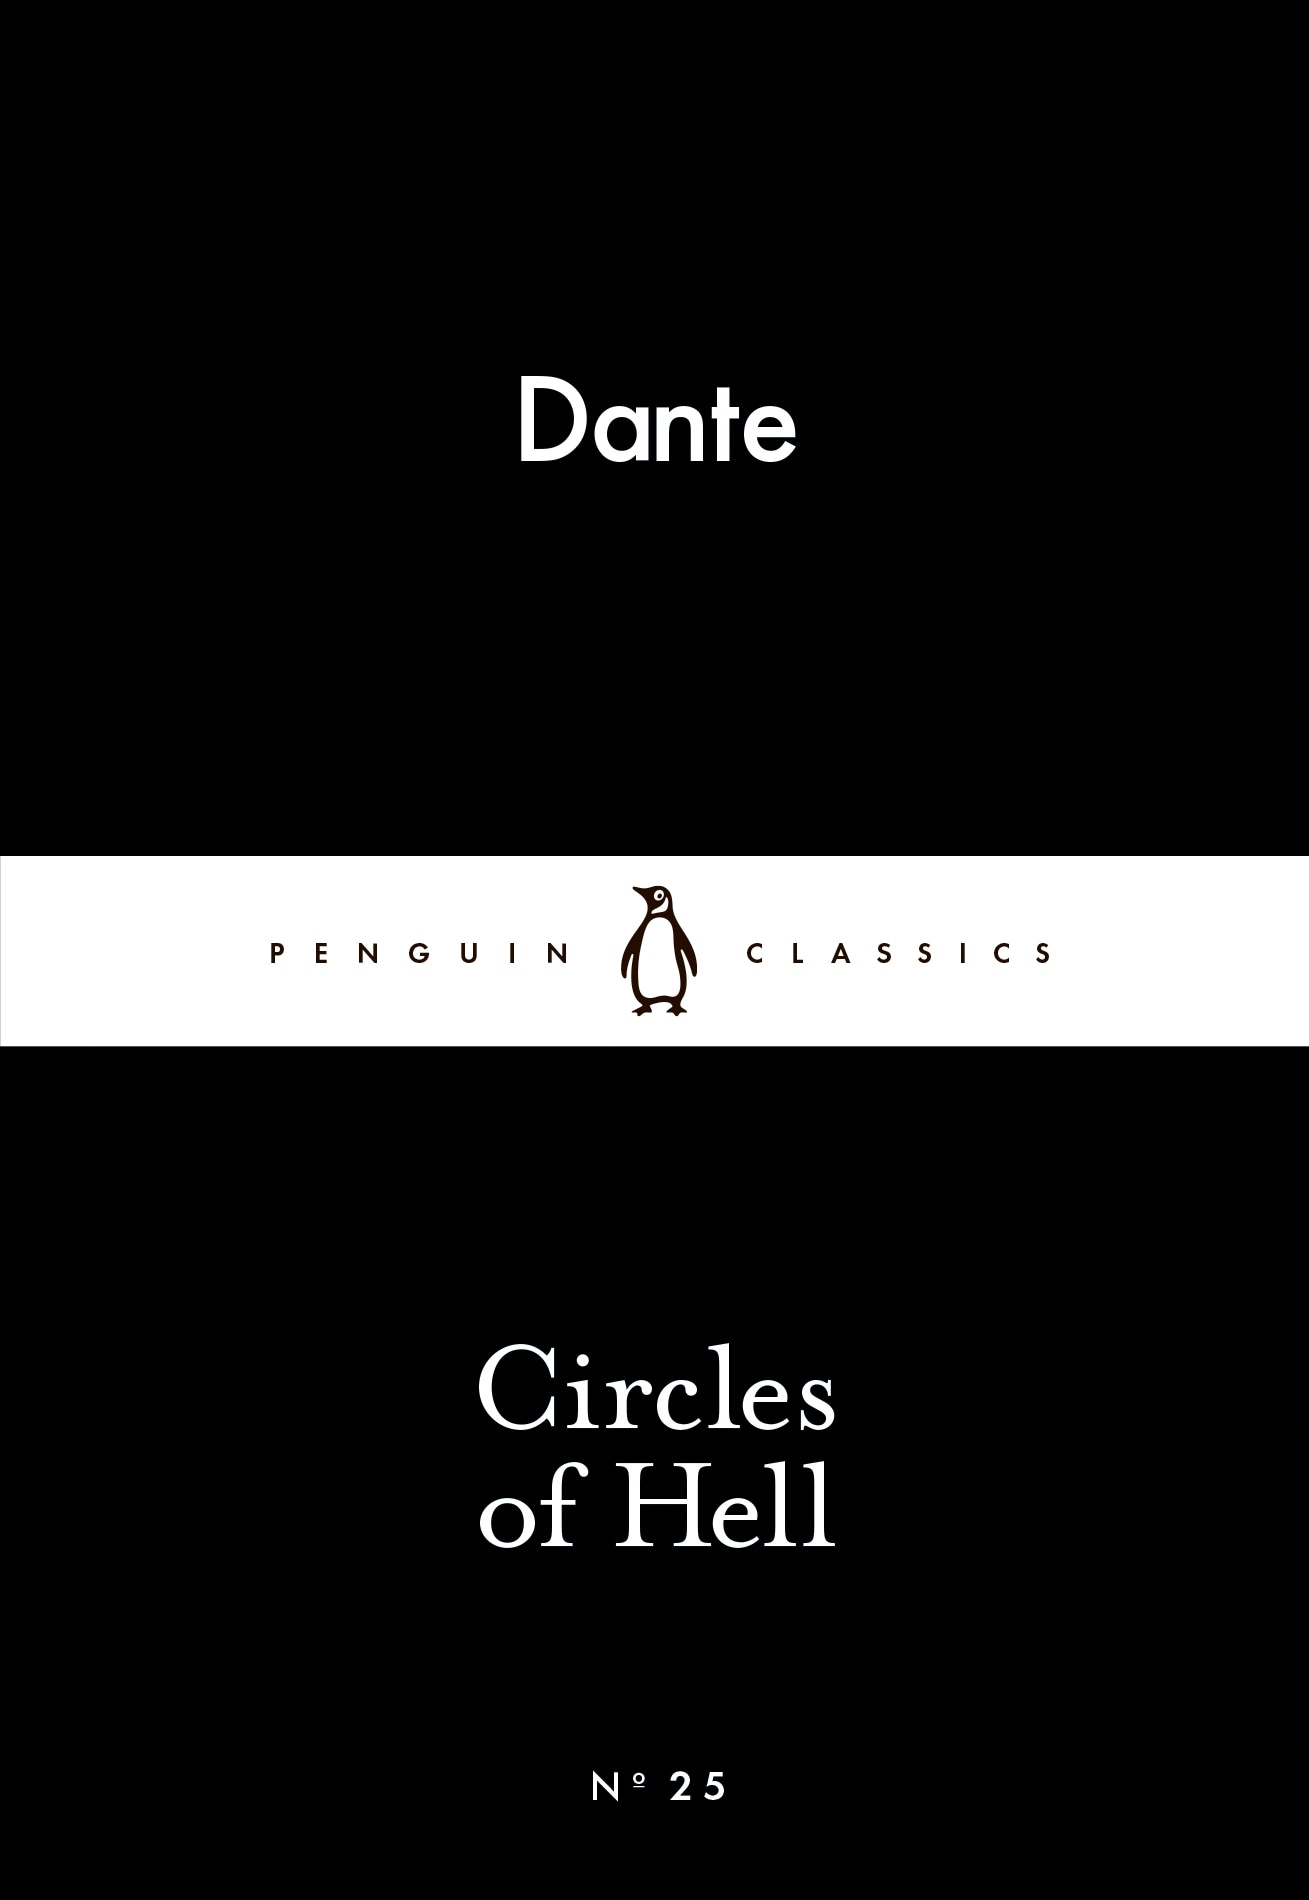 Book “Circles of Hell” by Dante — February 26, 2015